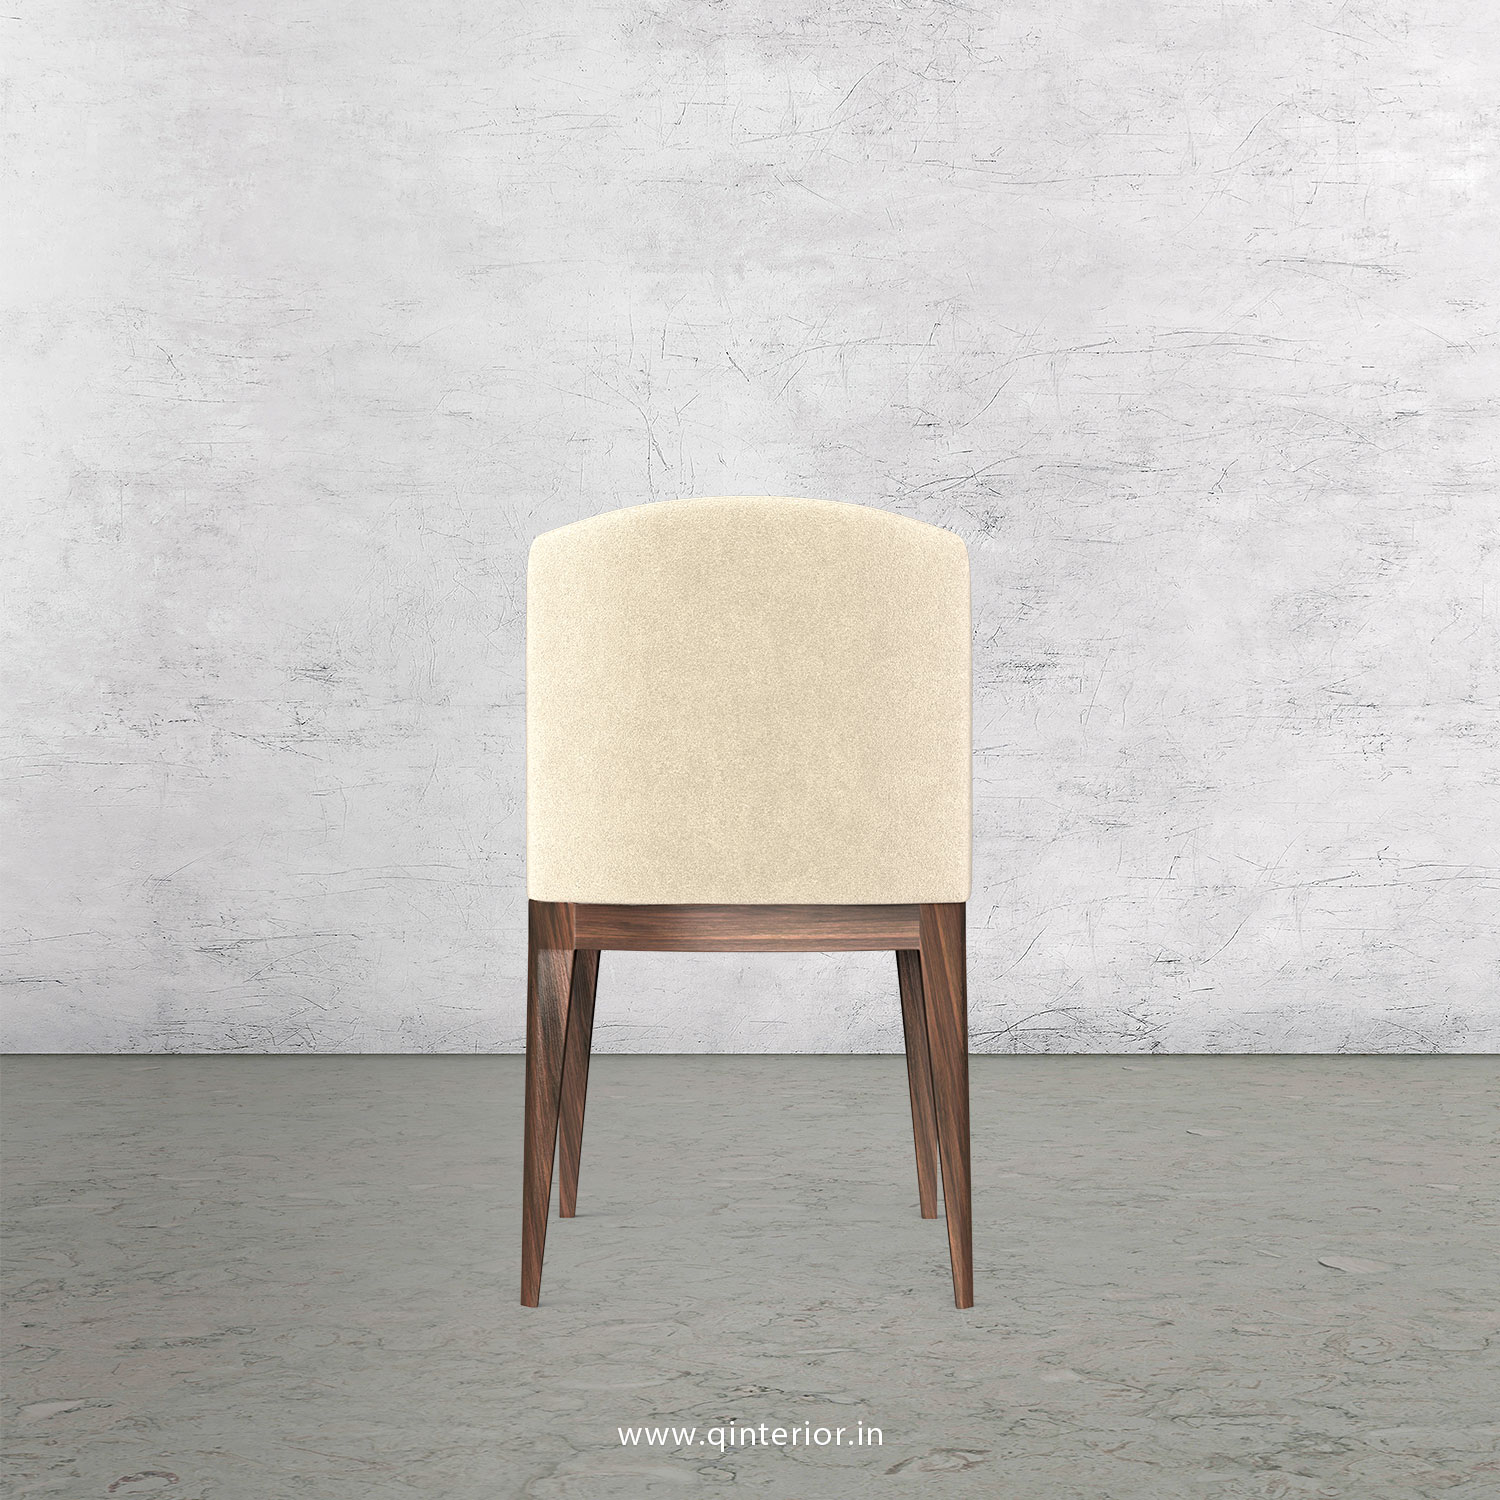 Cario Dining Chair in Velvet Fabric - DCH001 VL01